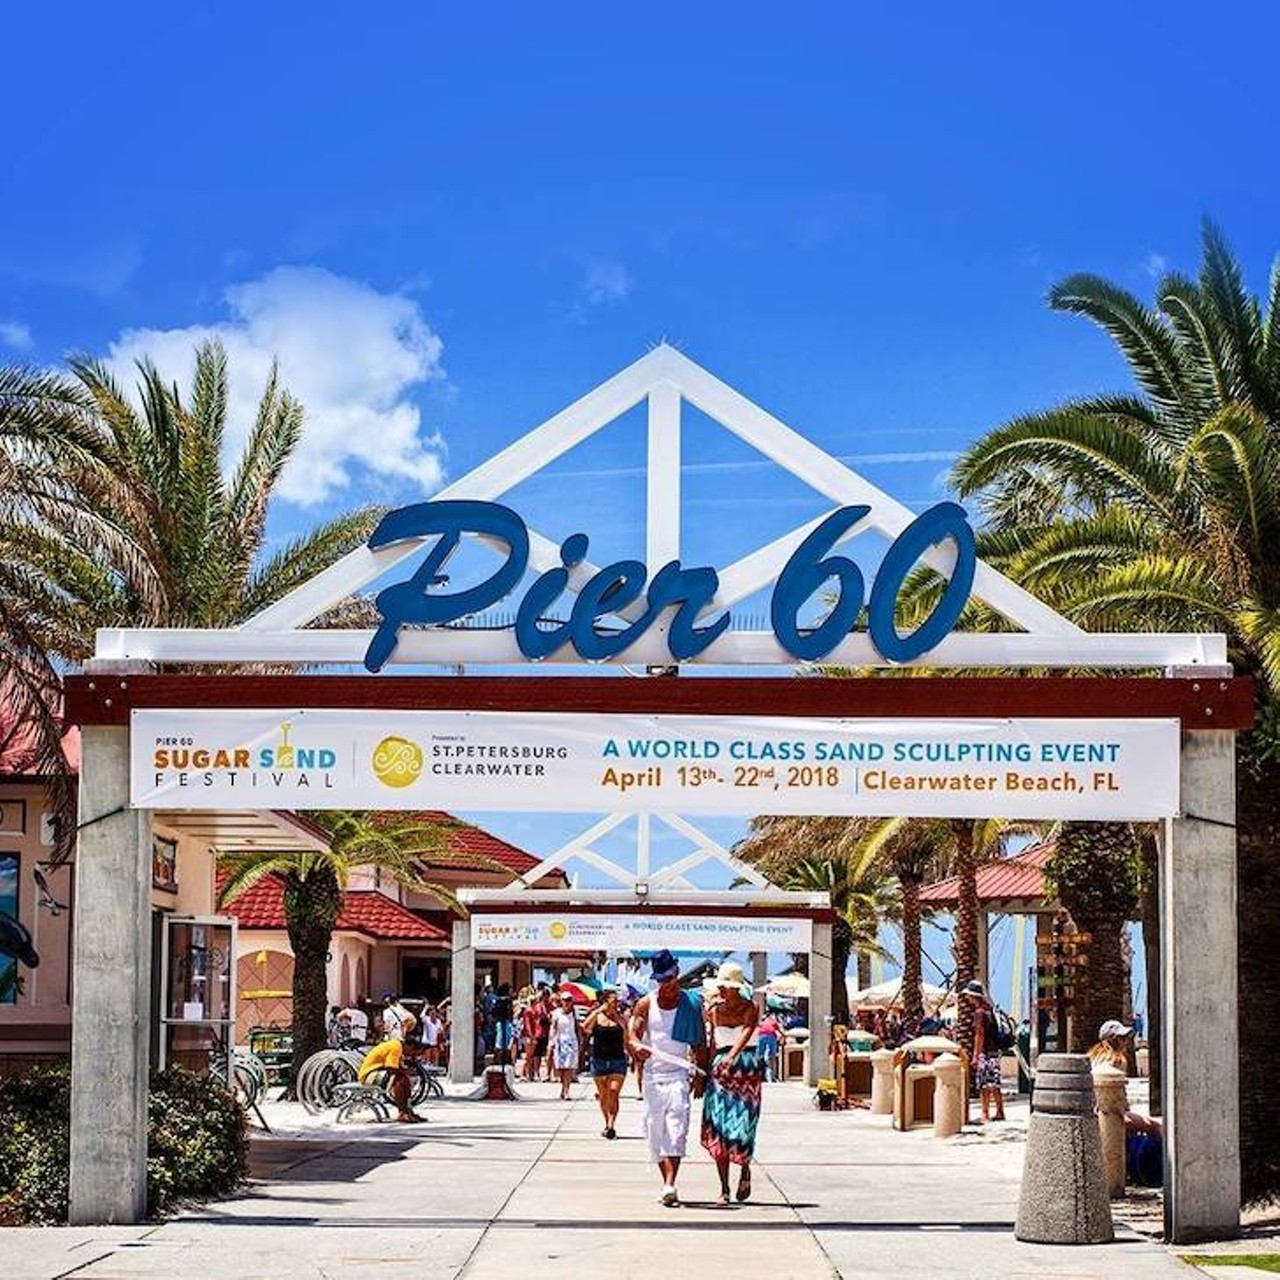 Pier 60 Clearwater Beach   
7 Causeway Blvd., Clearwater, 727-462-6466
Pier 60 features a 1,080-foot fishing pier and recreational park, with a bait house, telescopes and six covered pavilions.
Photo via Pier 60/Facebook